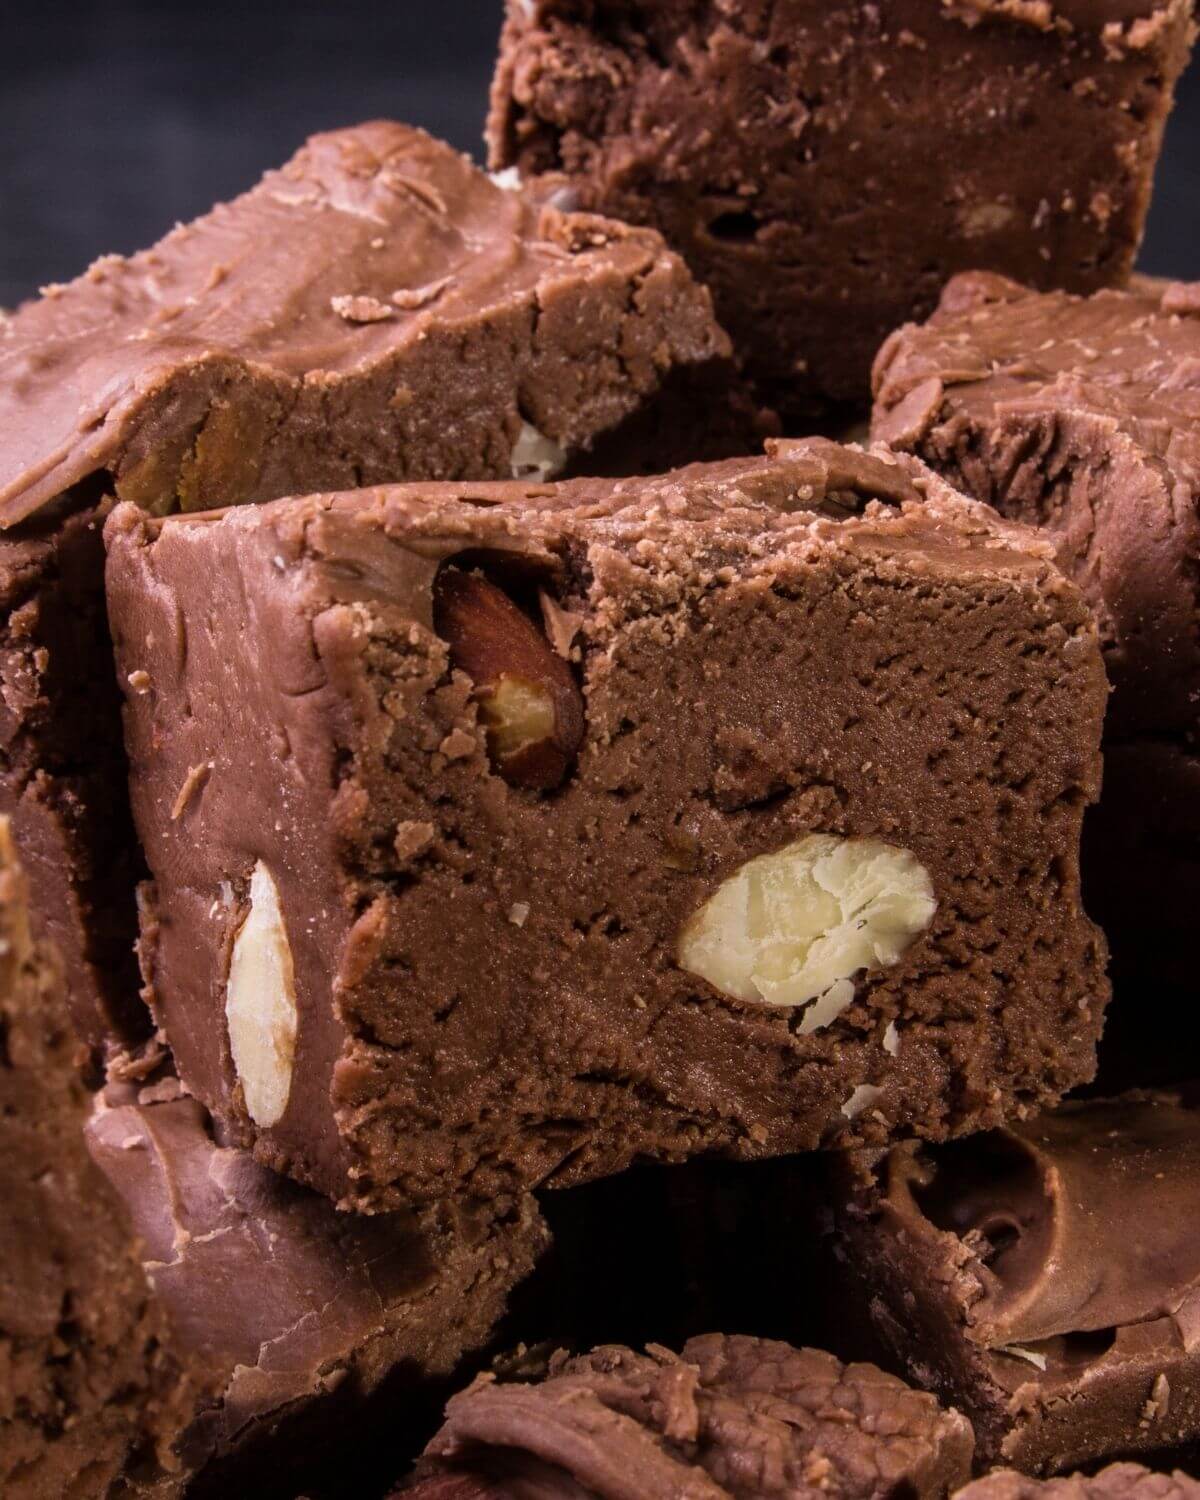 A close up on a piece of the milk chocolate fudge.